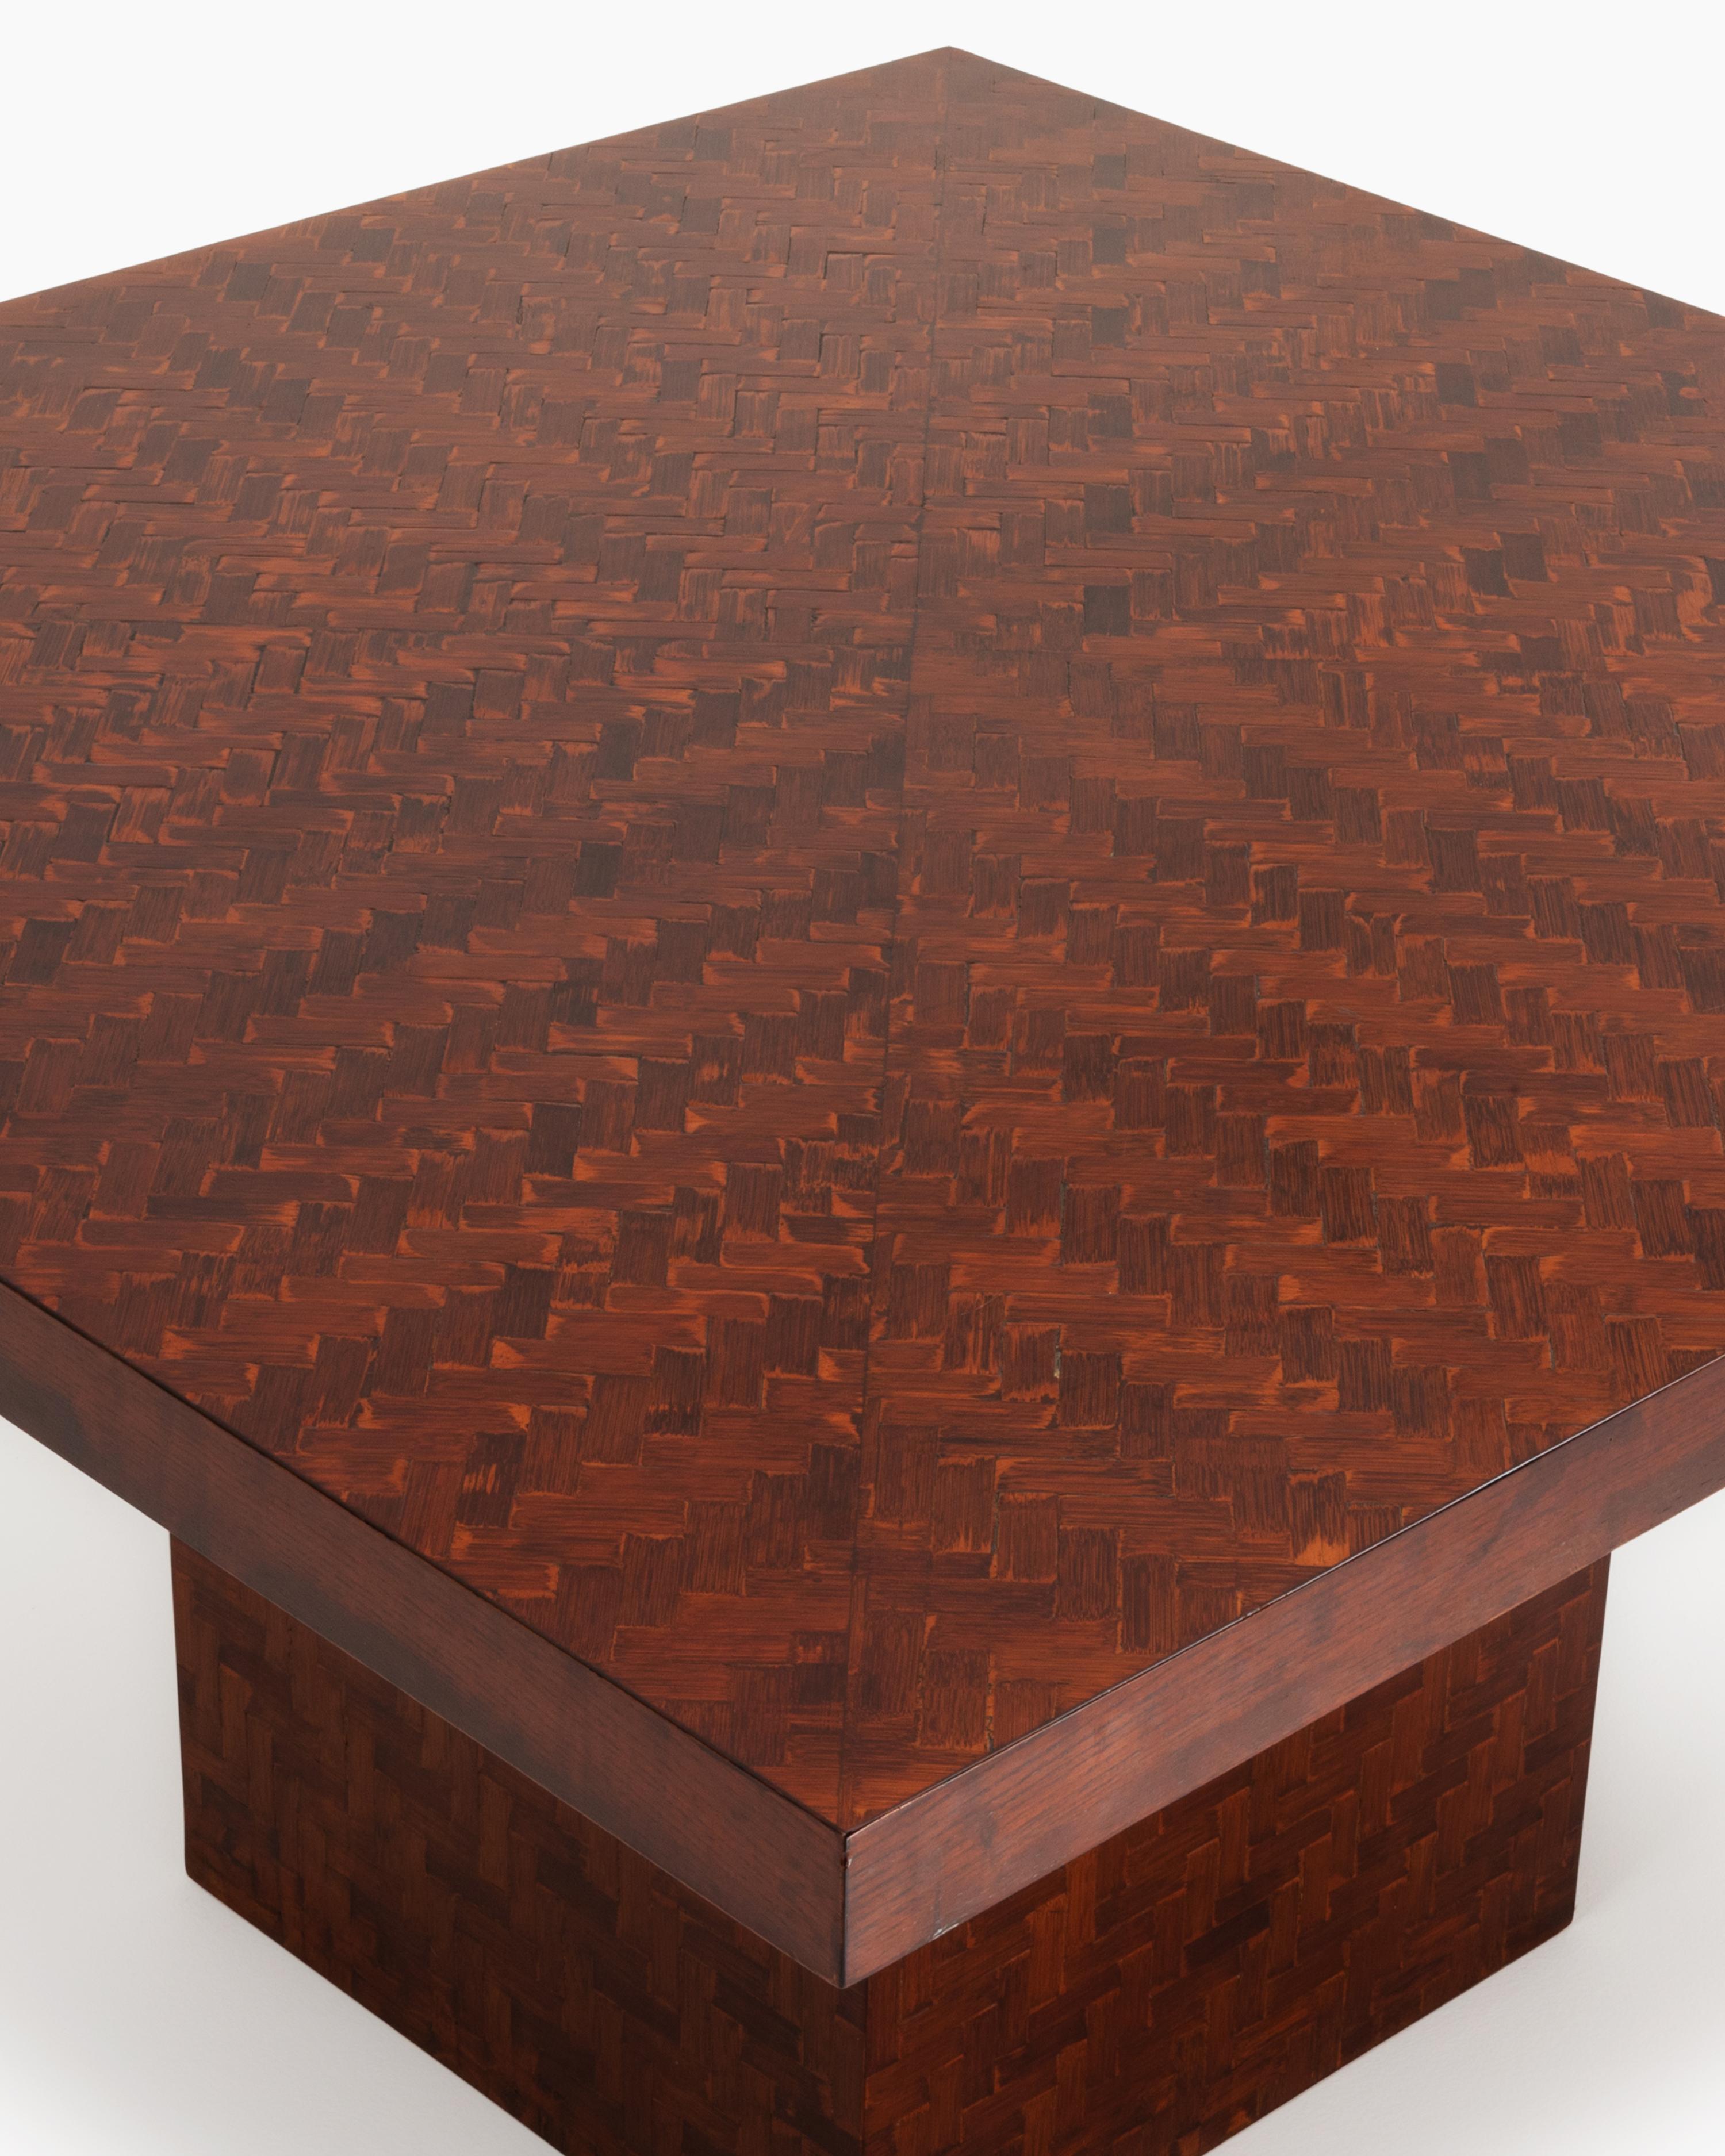 Hardwood Square Dining Table for Turri with Dyed Banana Leaf Weaving ontop of Wood, 1970s For Sale